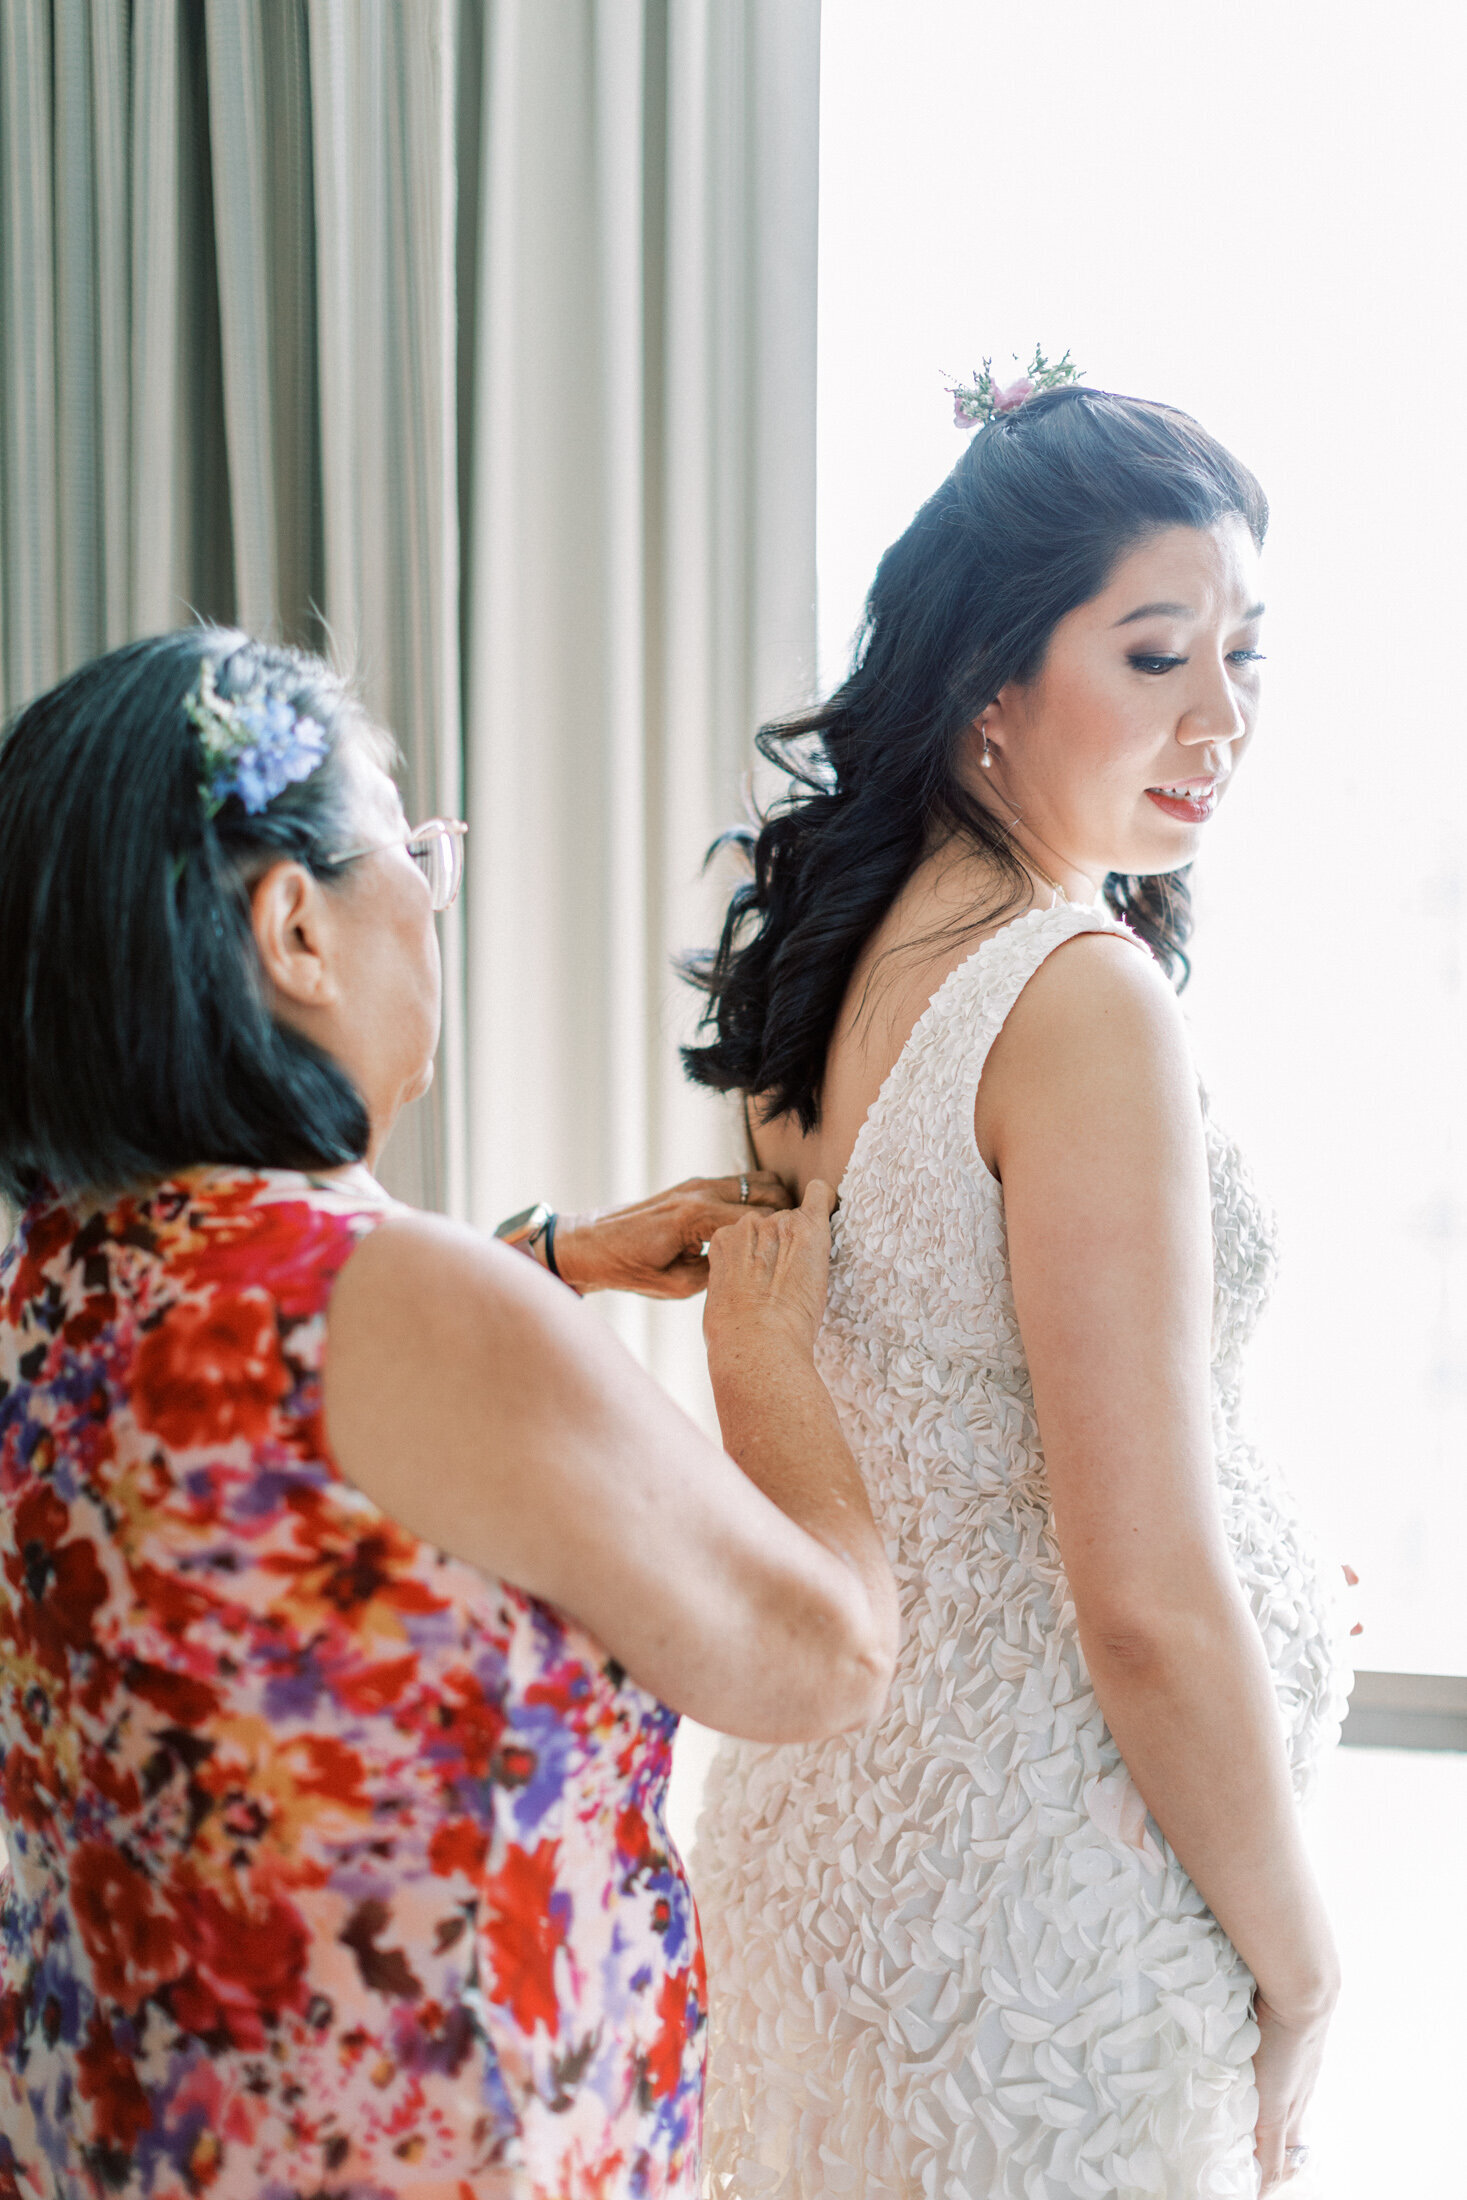 Bride gets ready as mom helps her button her dress